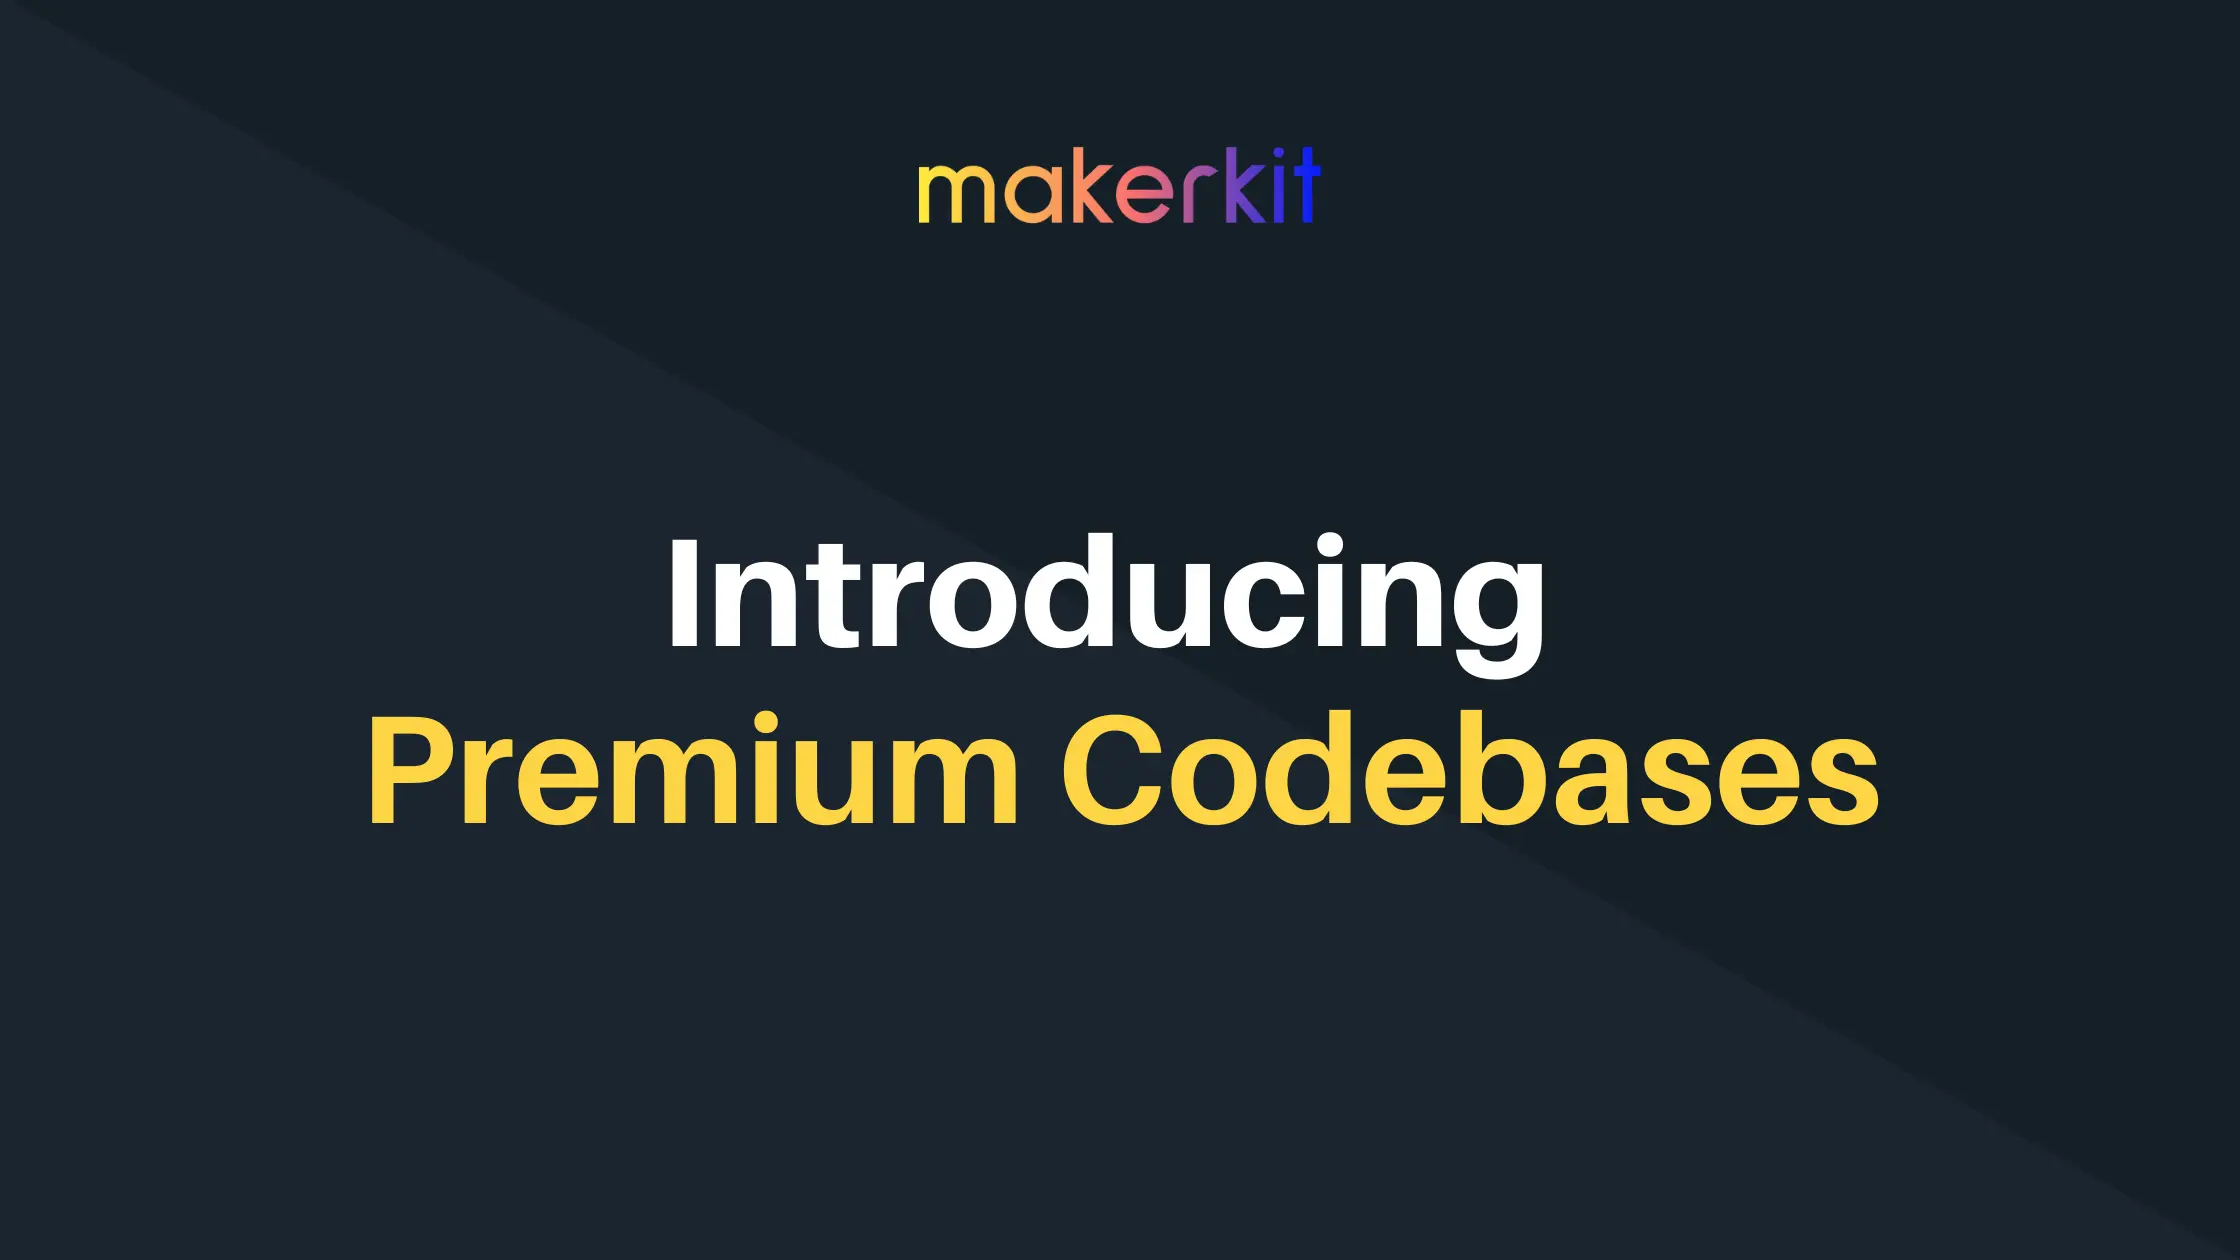 Cover Image for Announcing Premium Codebase Access